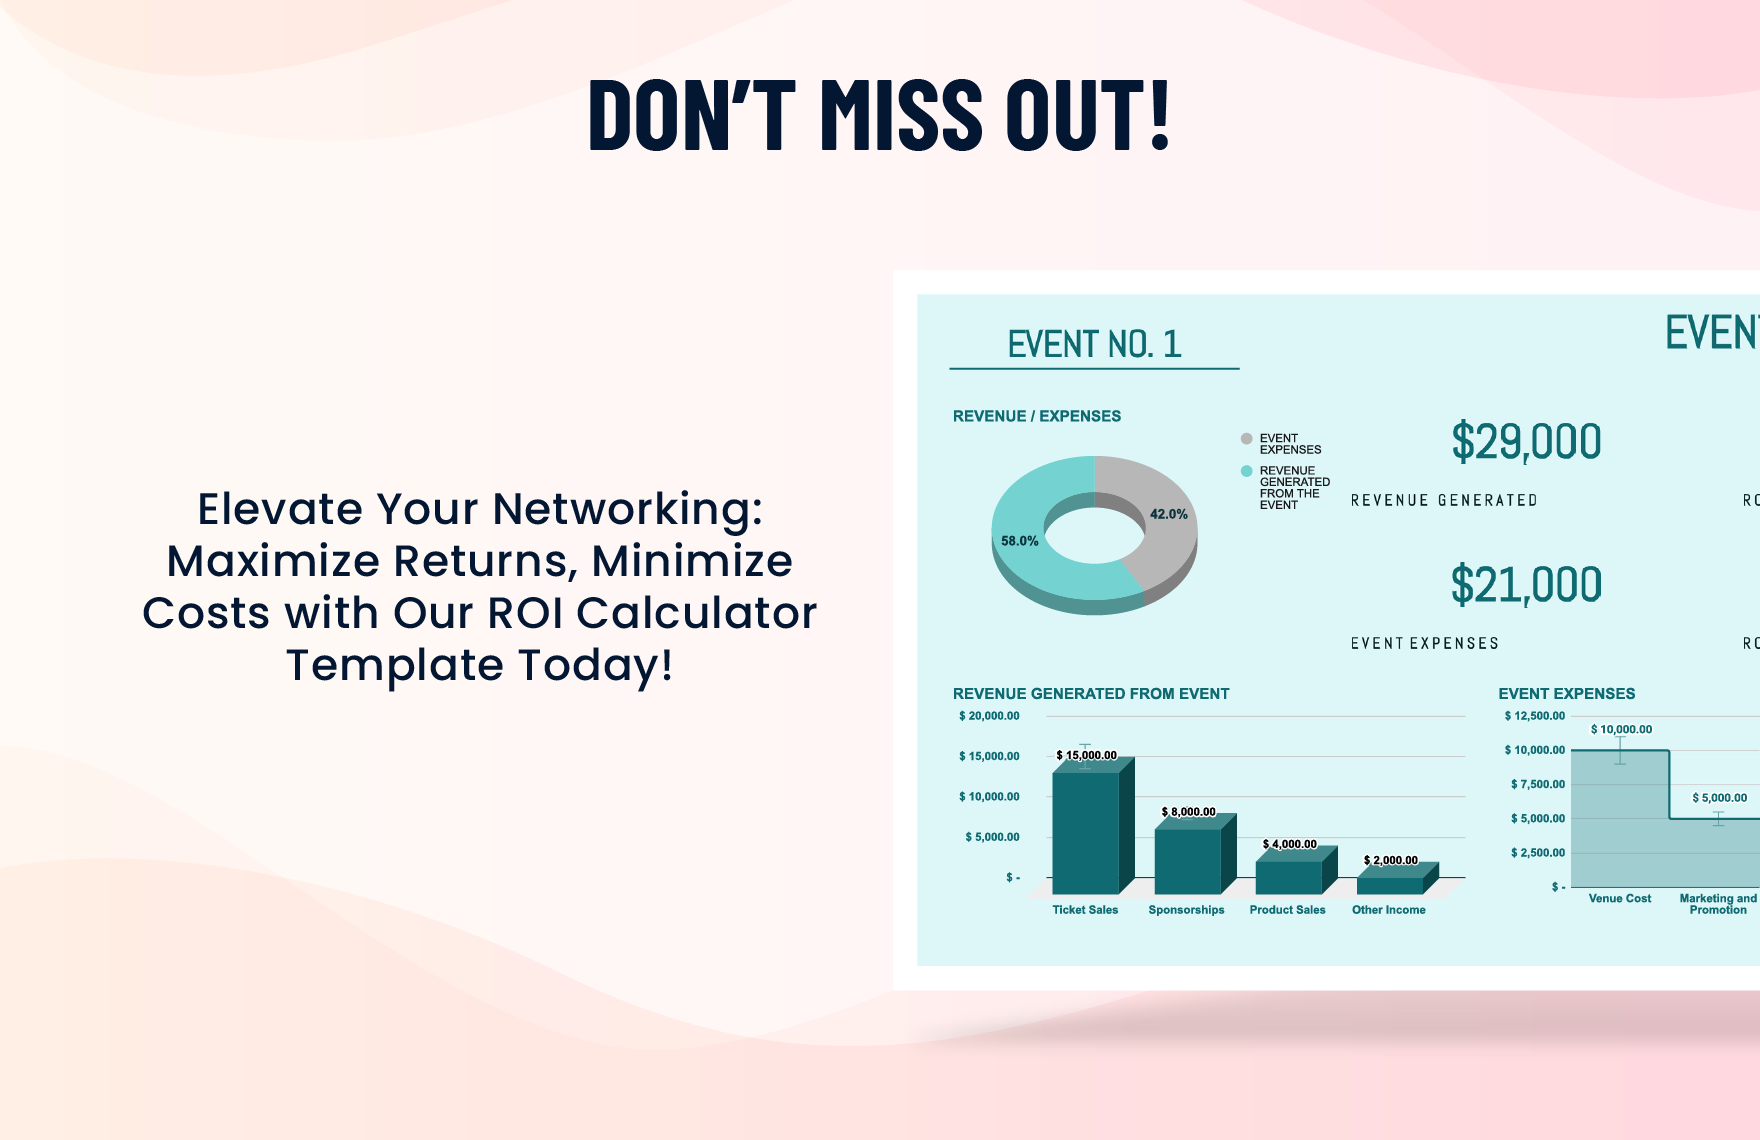 Sales Networking Event ROI Calculator Template